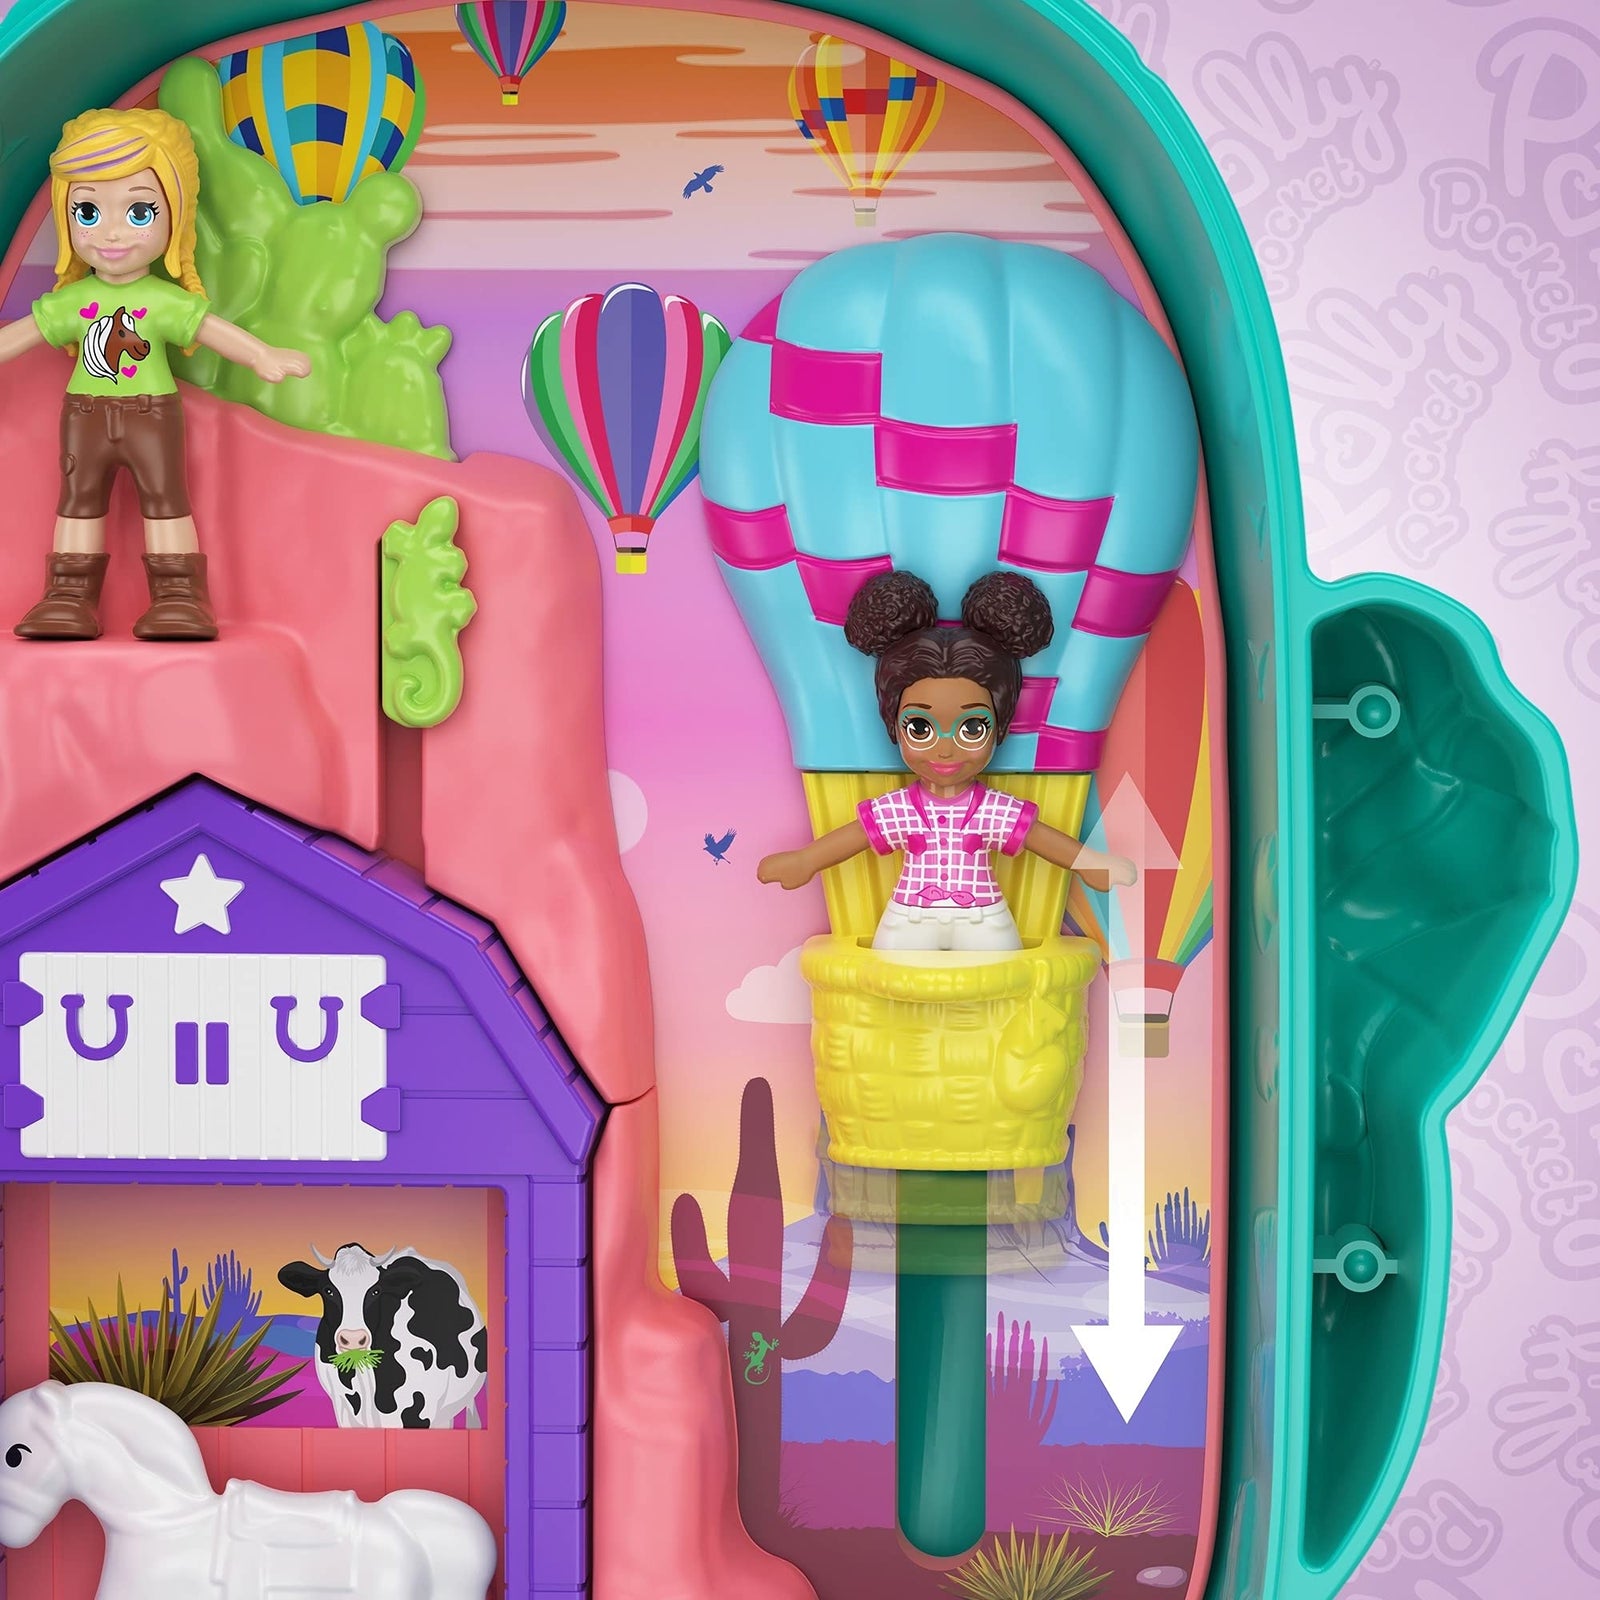 Polly Pocket Pocket World Cactus Cowgirl Ranch Compact with Fun Reveals, Micro Polly and Shani Dolls, 2 Horse Figures and Sticker Sheet for Ages 4 and Up [Amazon Exclusive]